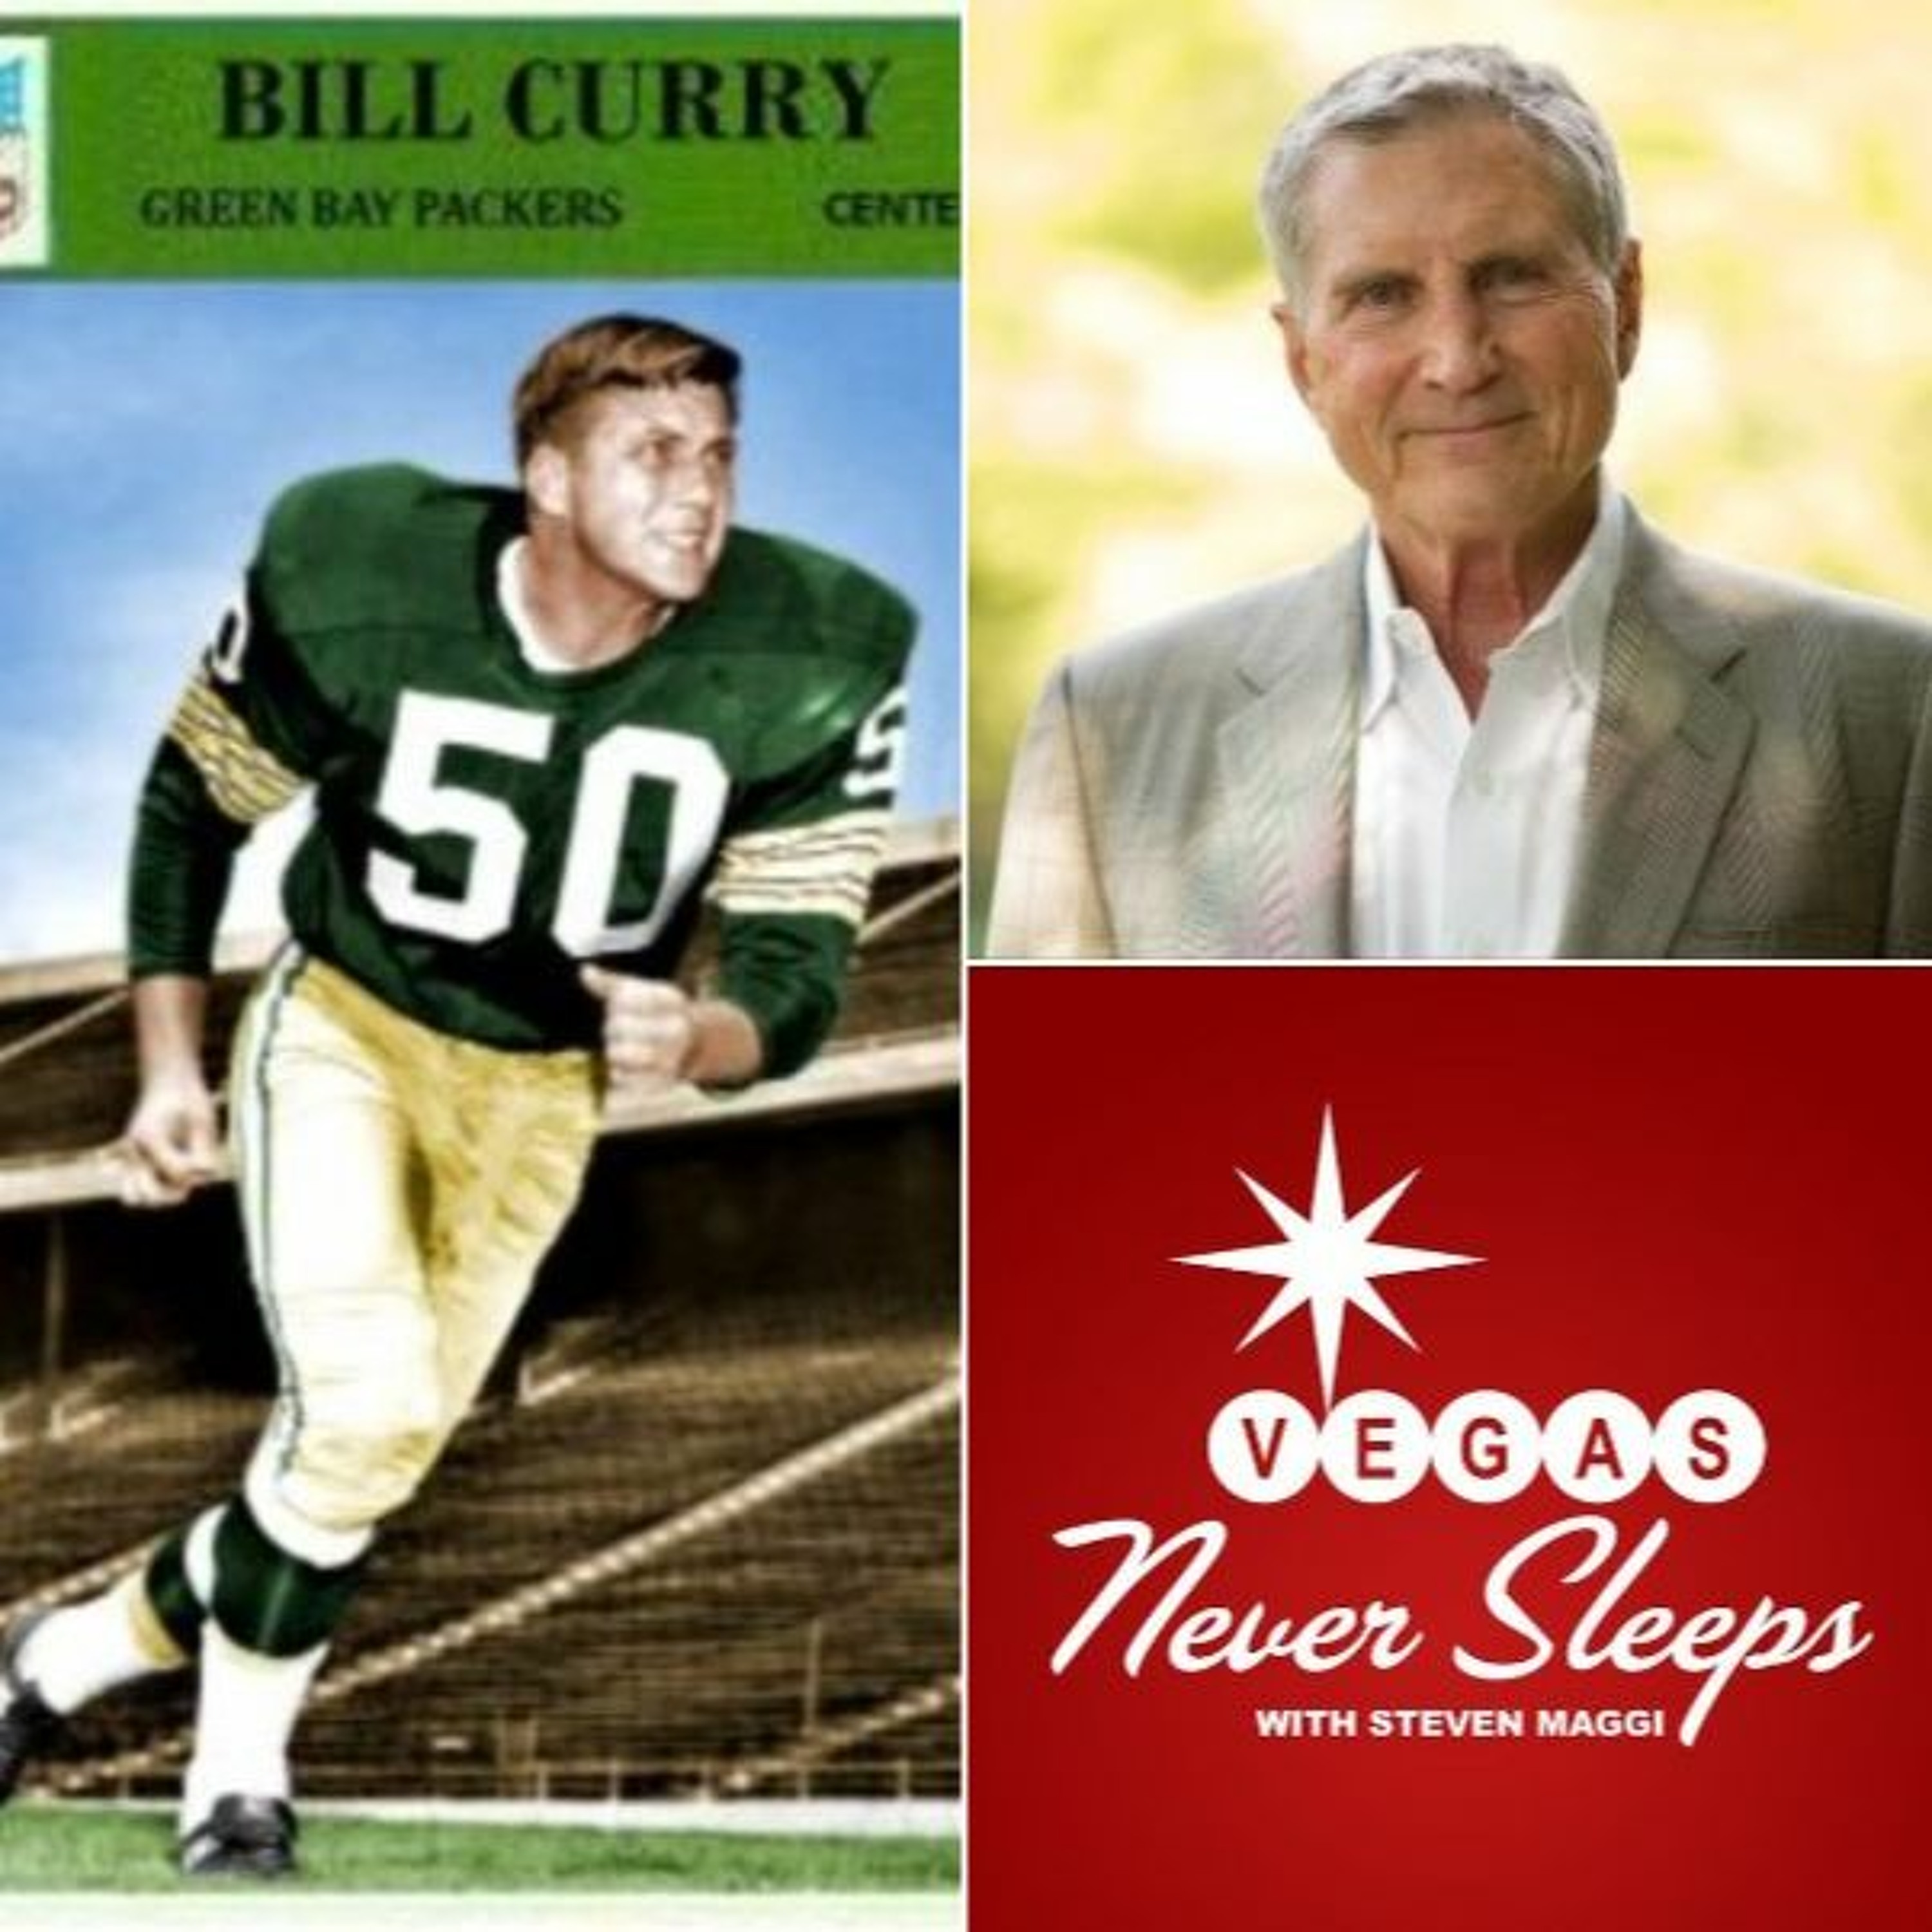 ”Coach, Communicator, Educator, Author” - The Complete Bill Curry Interview